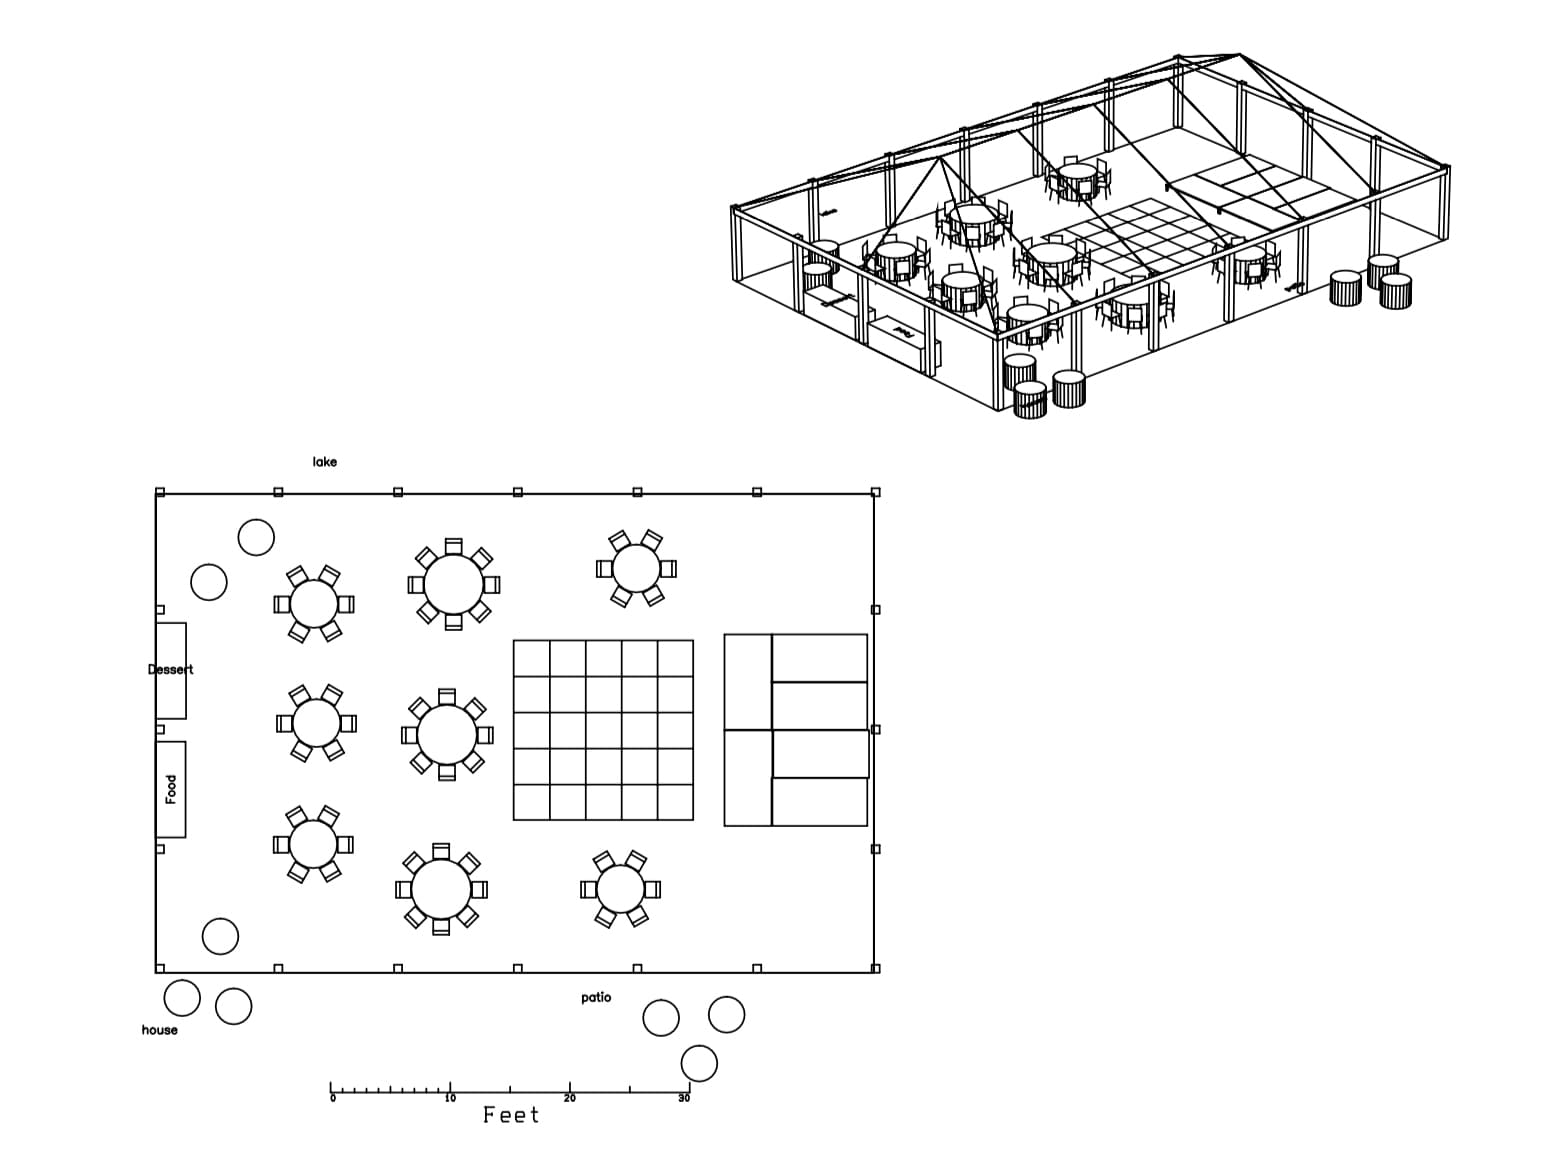 A sketched floorplan of an event space.